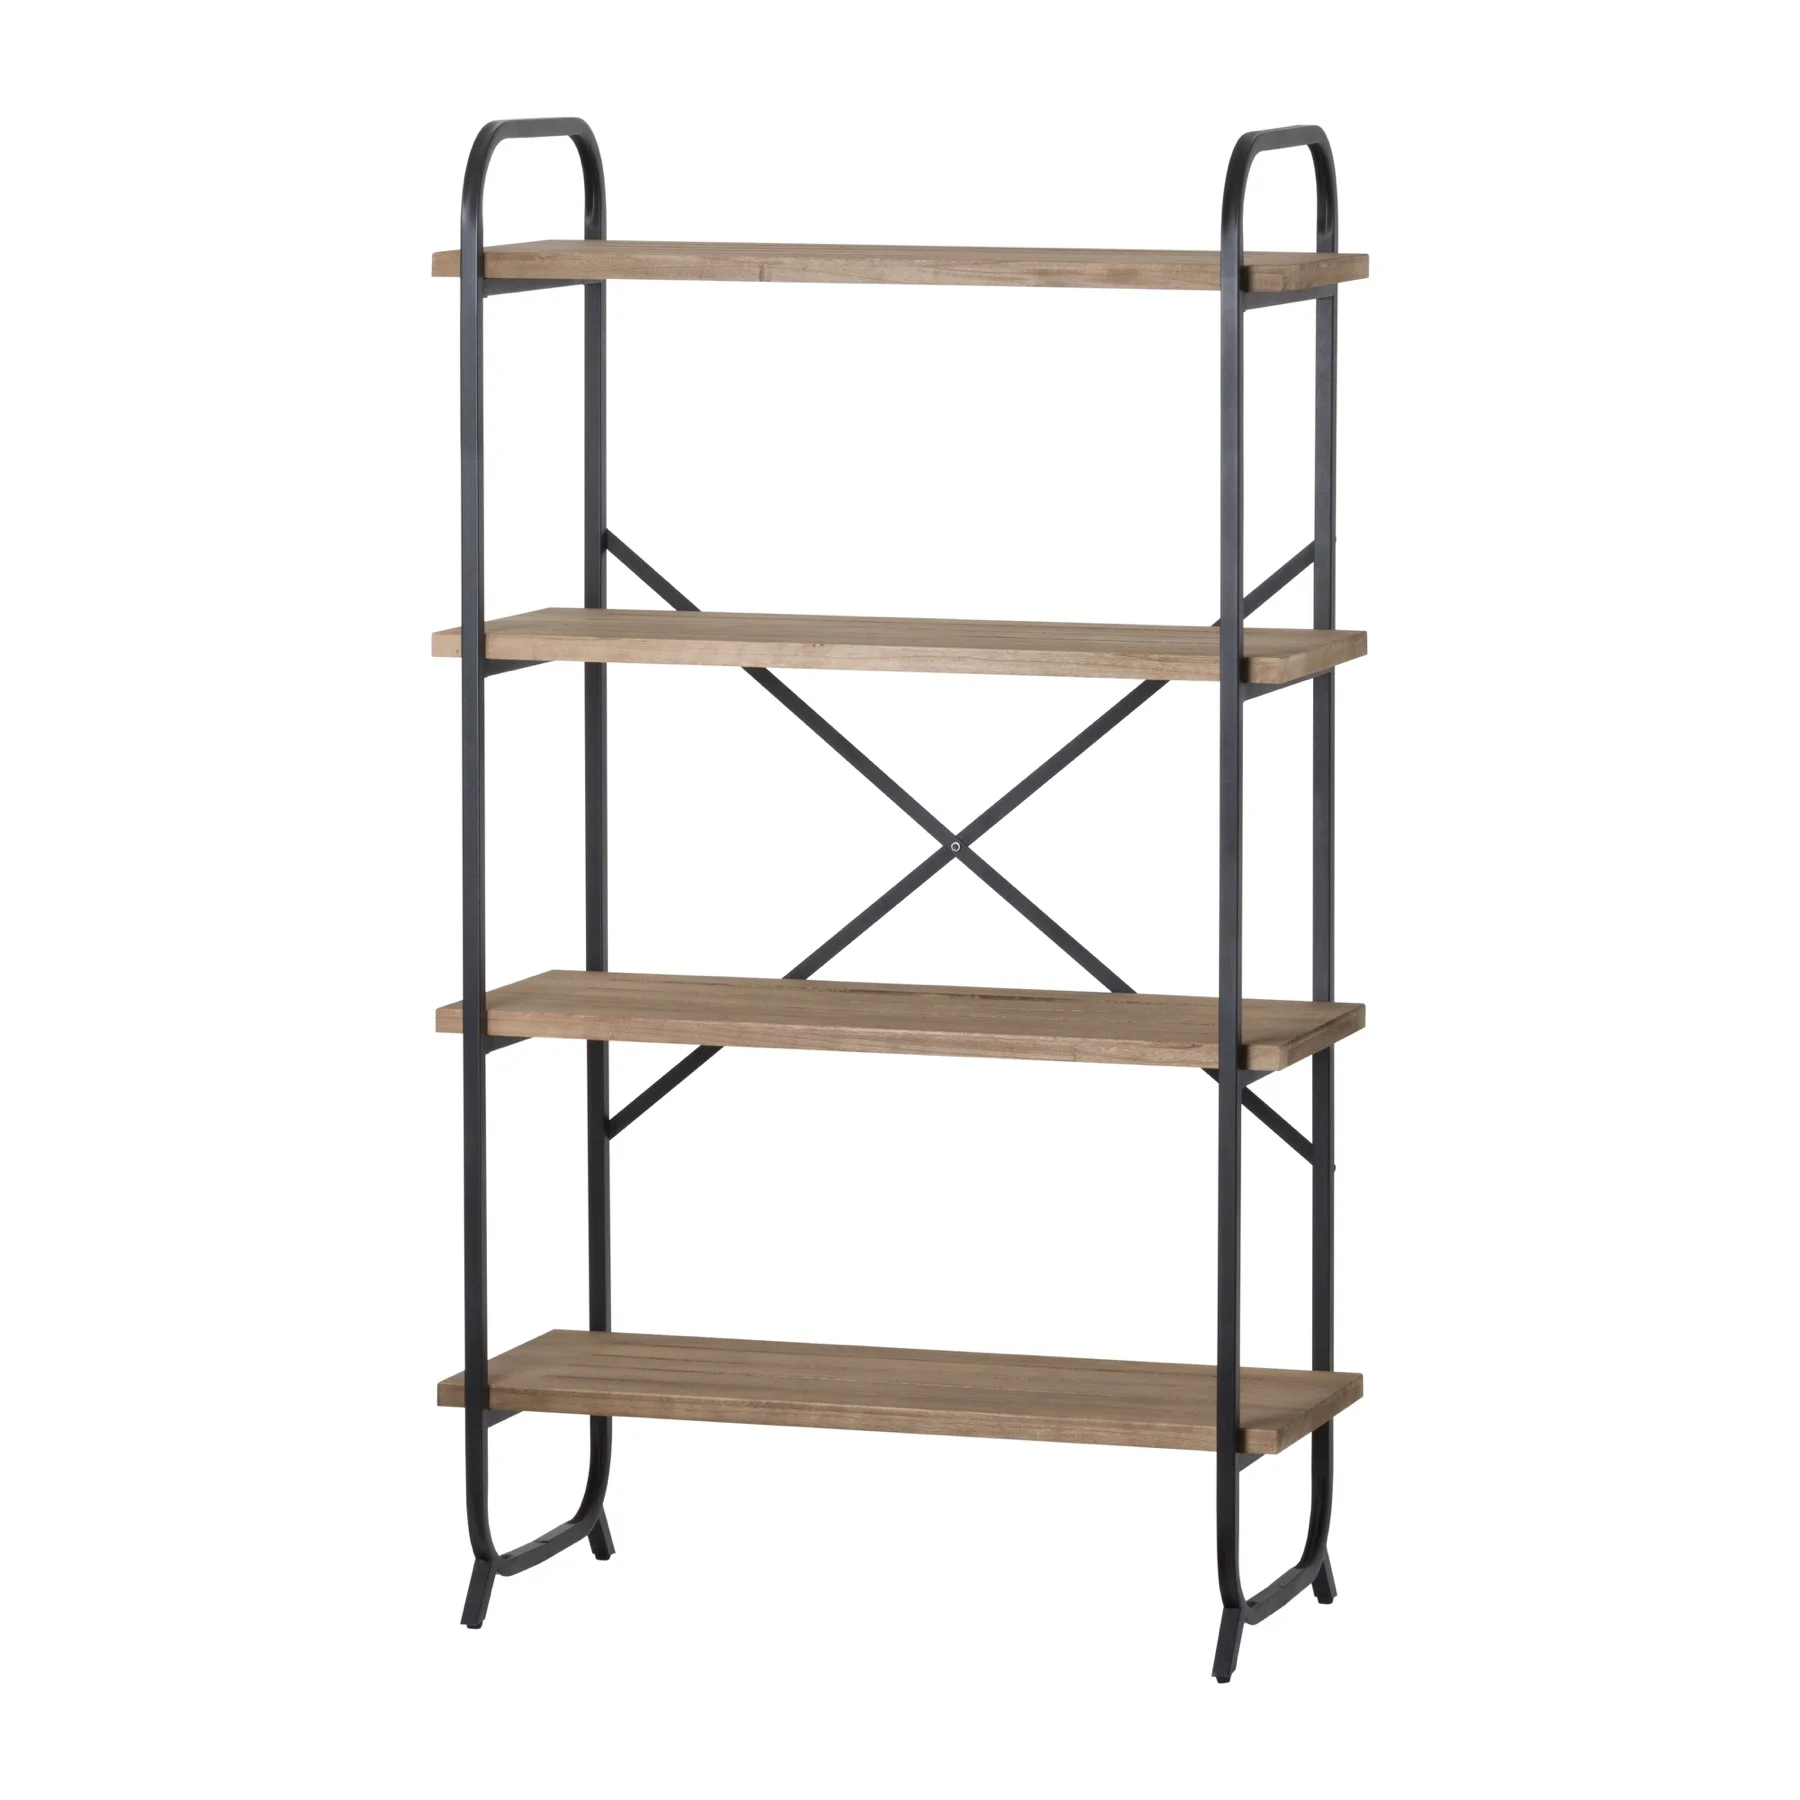 Four Tier Shelf Cross Section Industrial Display Unit